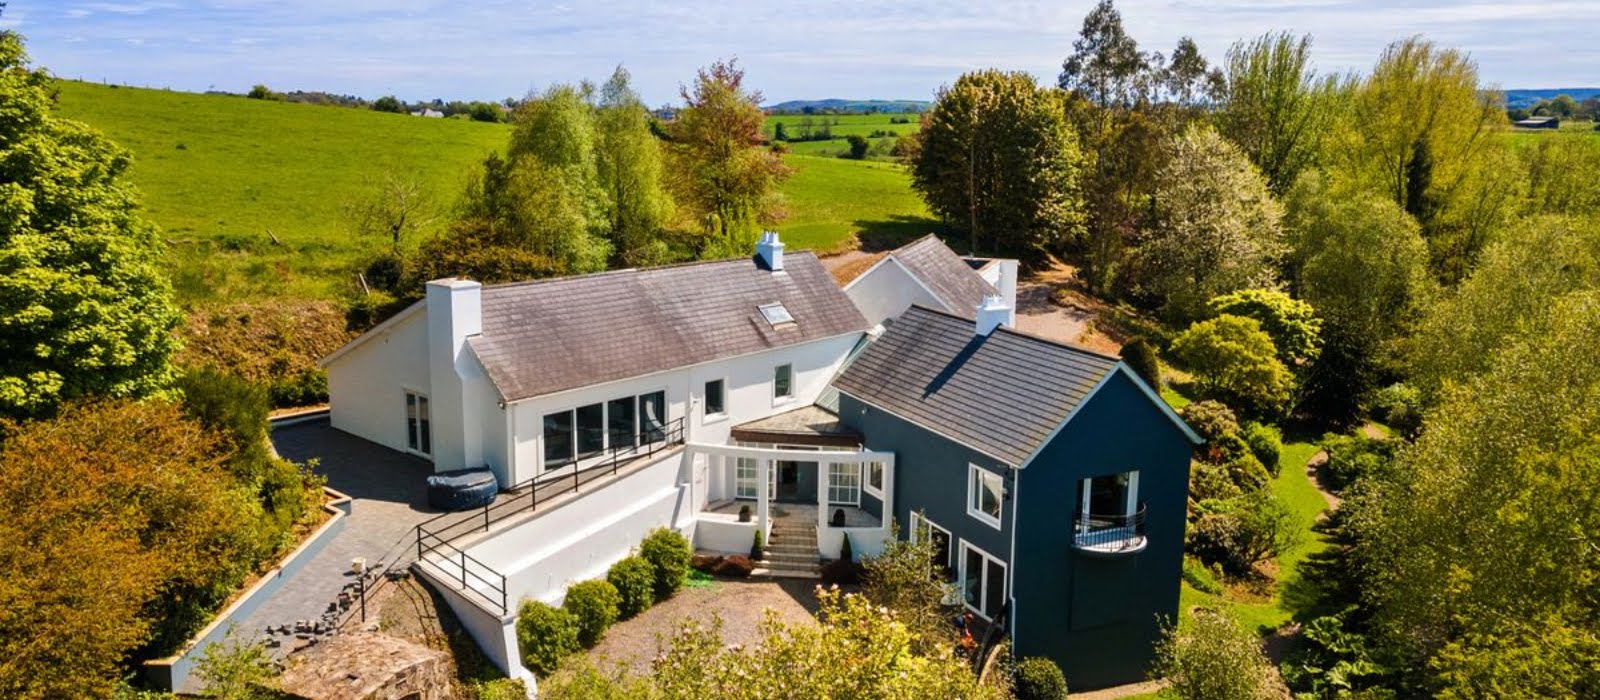 This six-bedroom home with a ‘a Christmas tree forest’ is on the market for €1.25 million